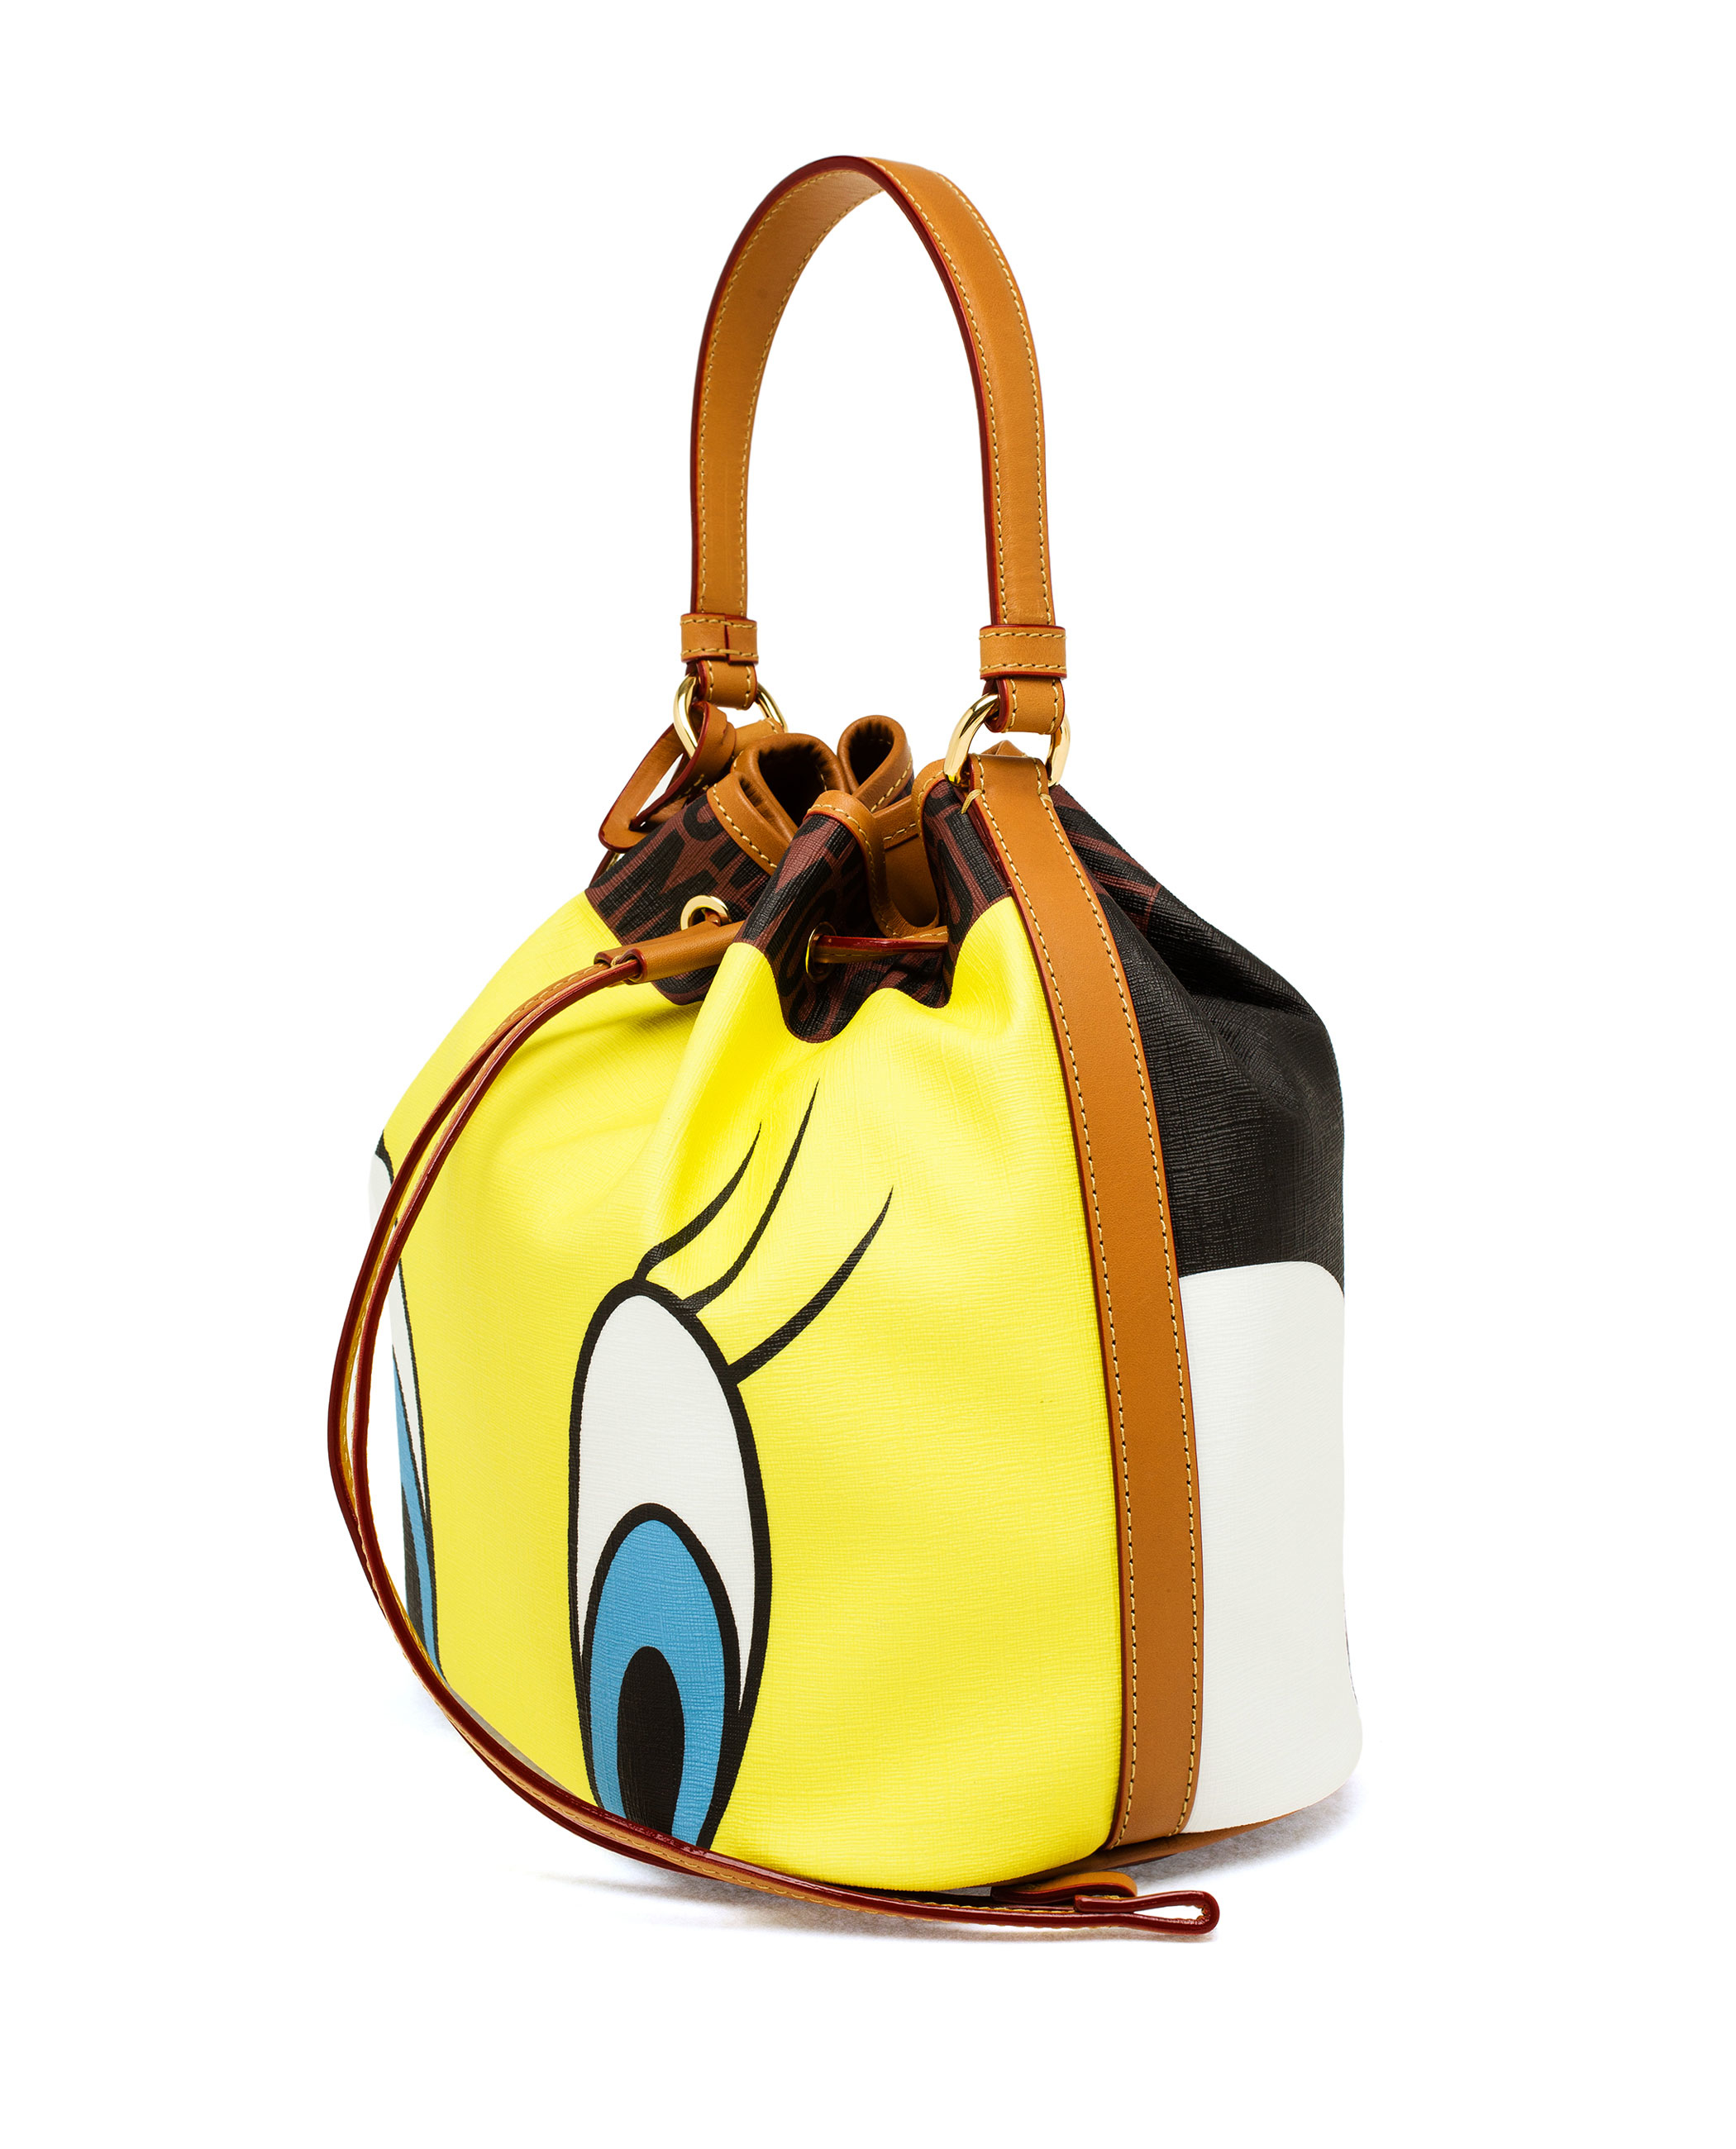 Moschino Looney Tunes Bucket Bag in Brown | Lyst